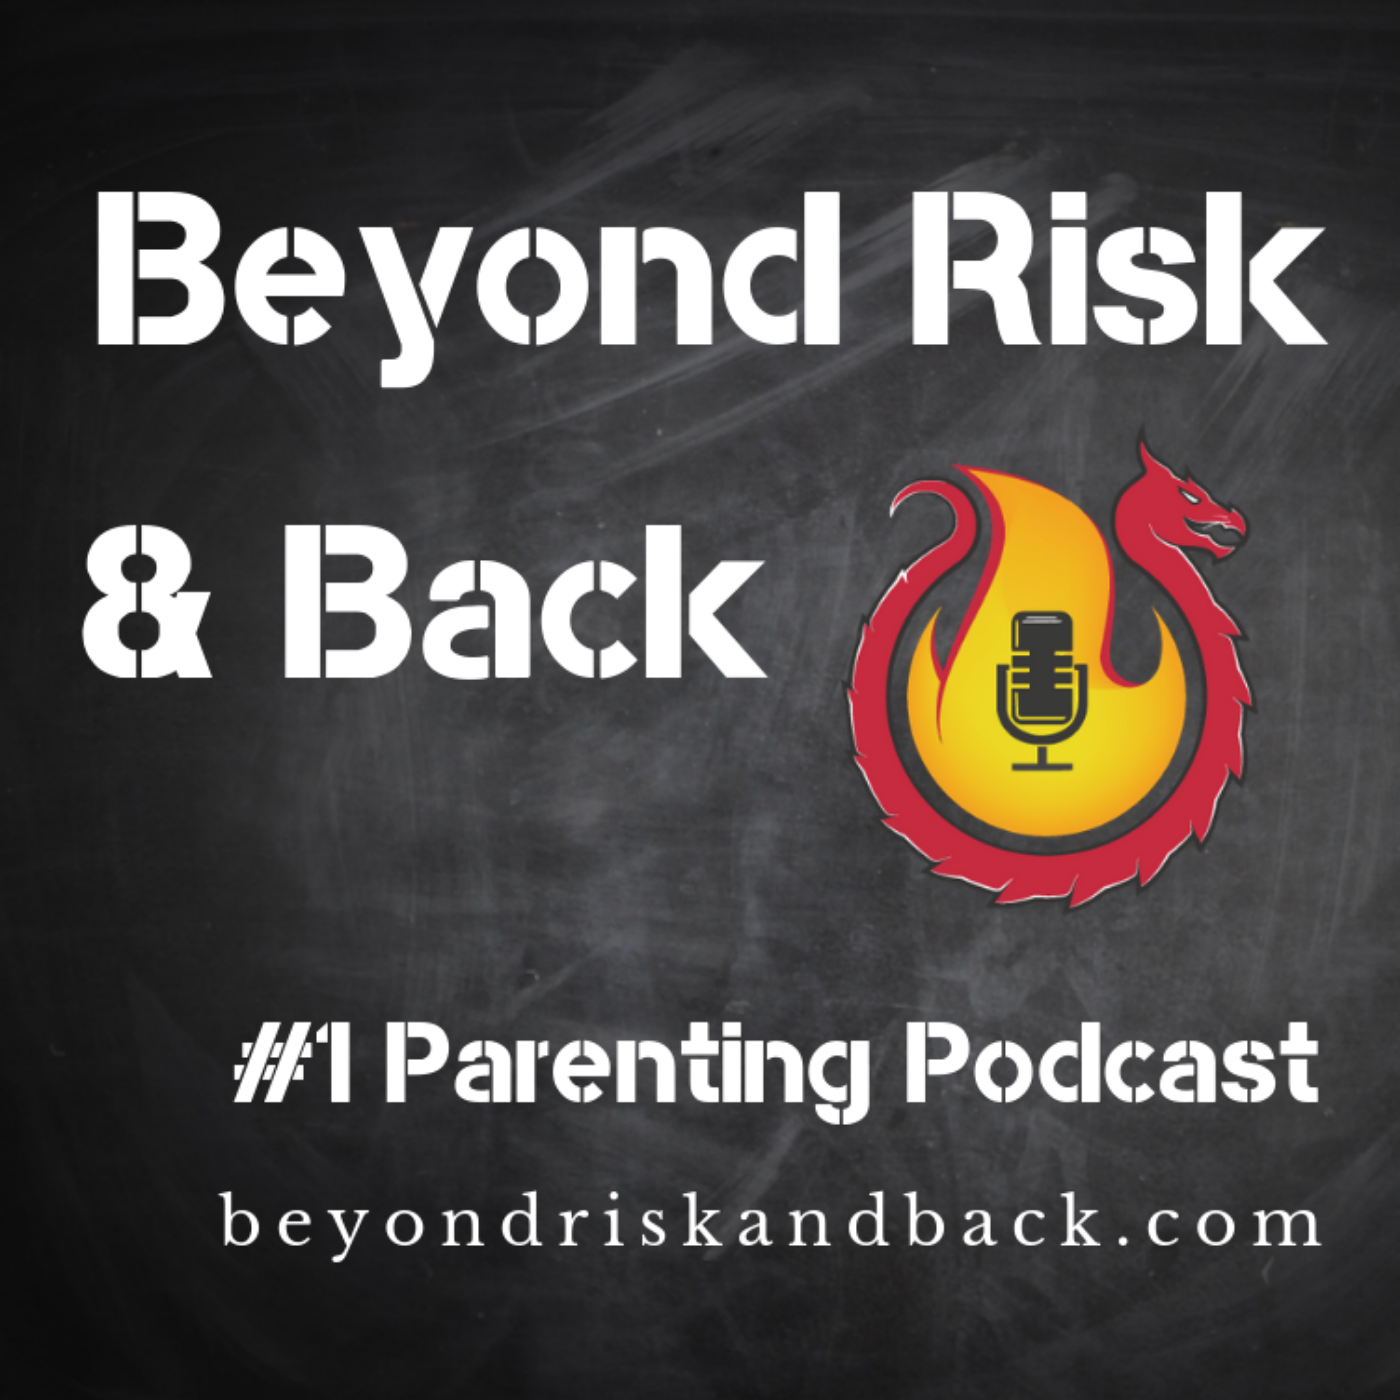 Beyond Risk & Back podcast Bob featured